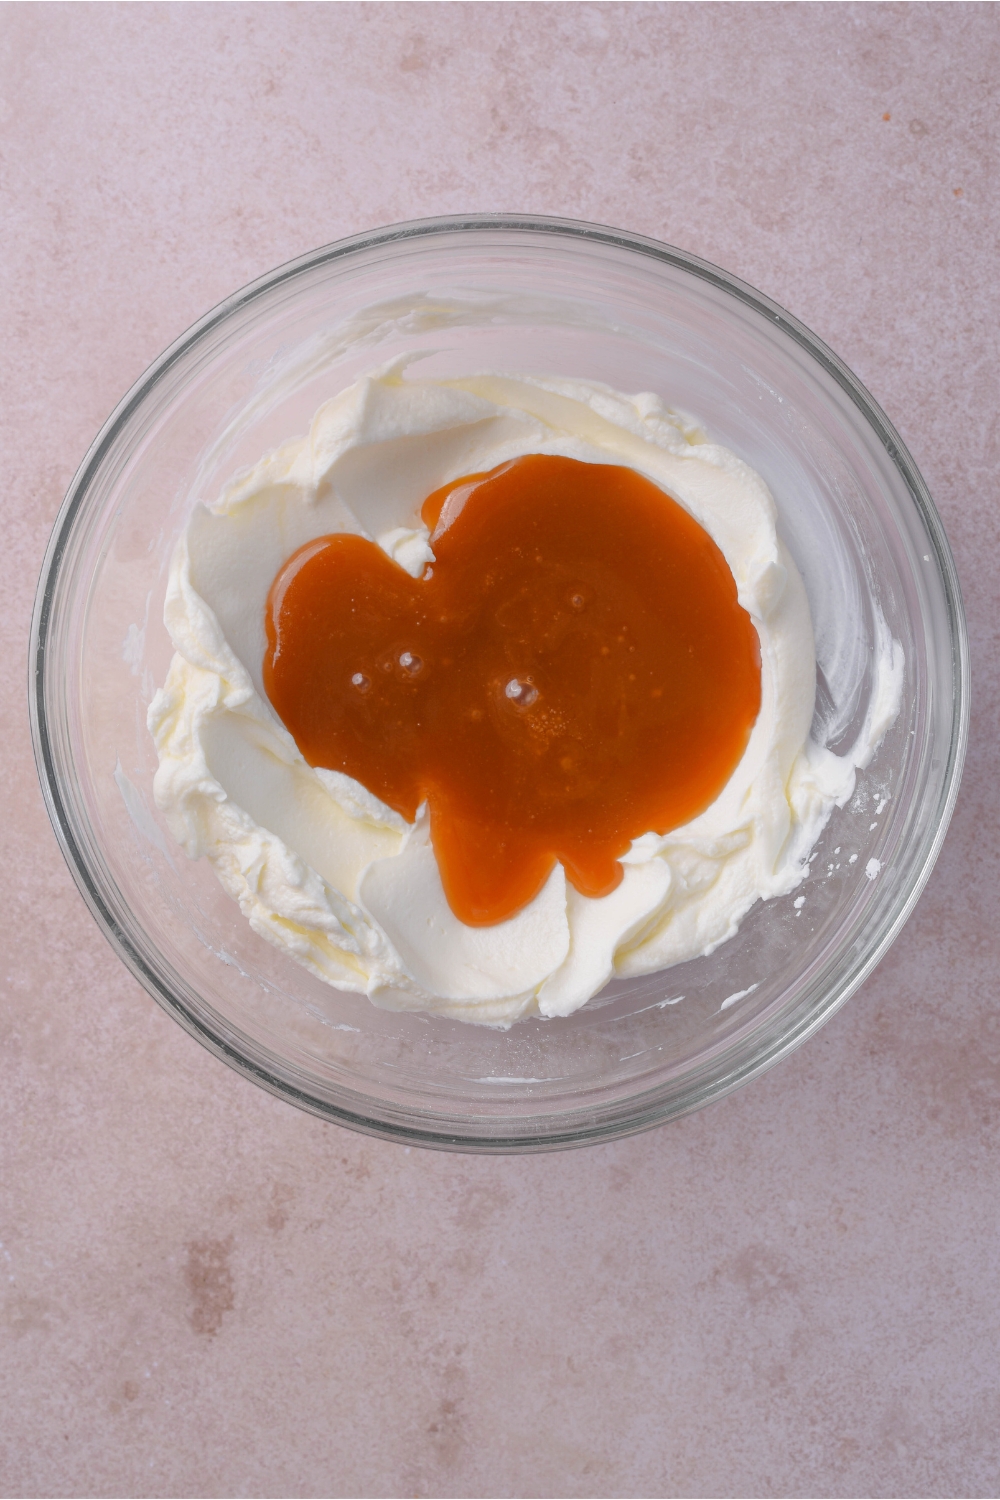 Caramel sauce on top of cream cheese mixture in a glass bowl on top of a white counter.